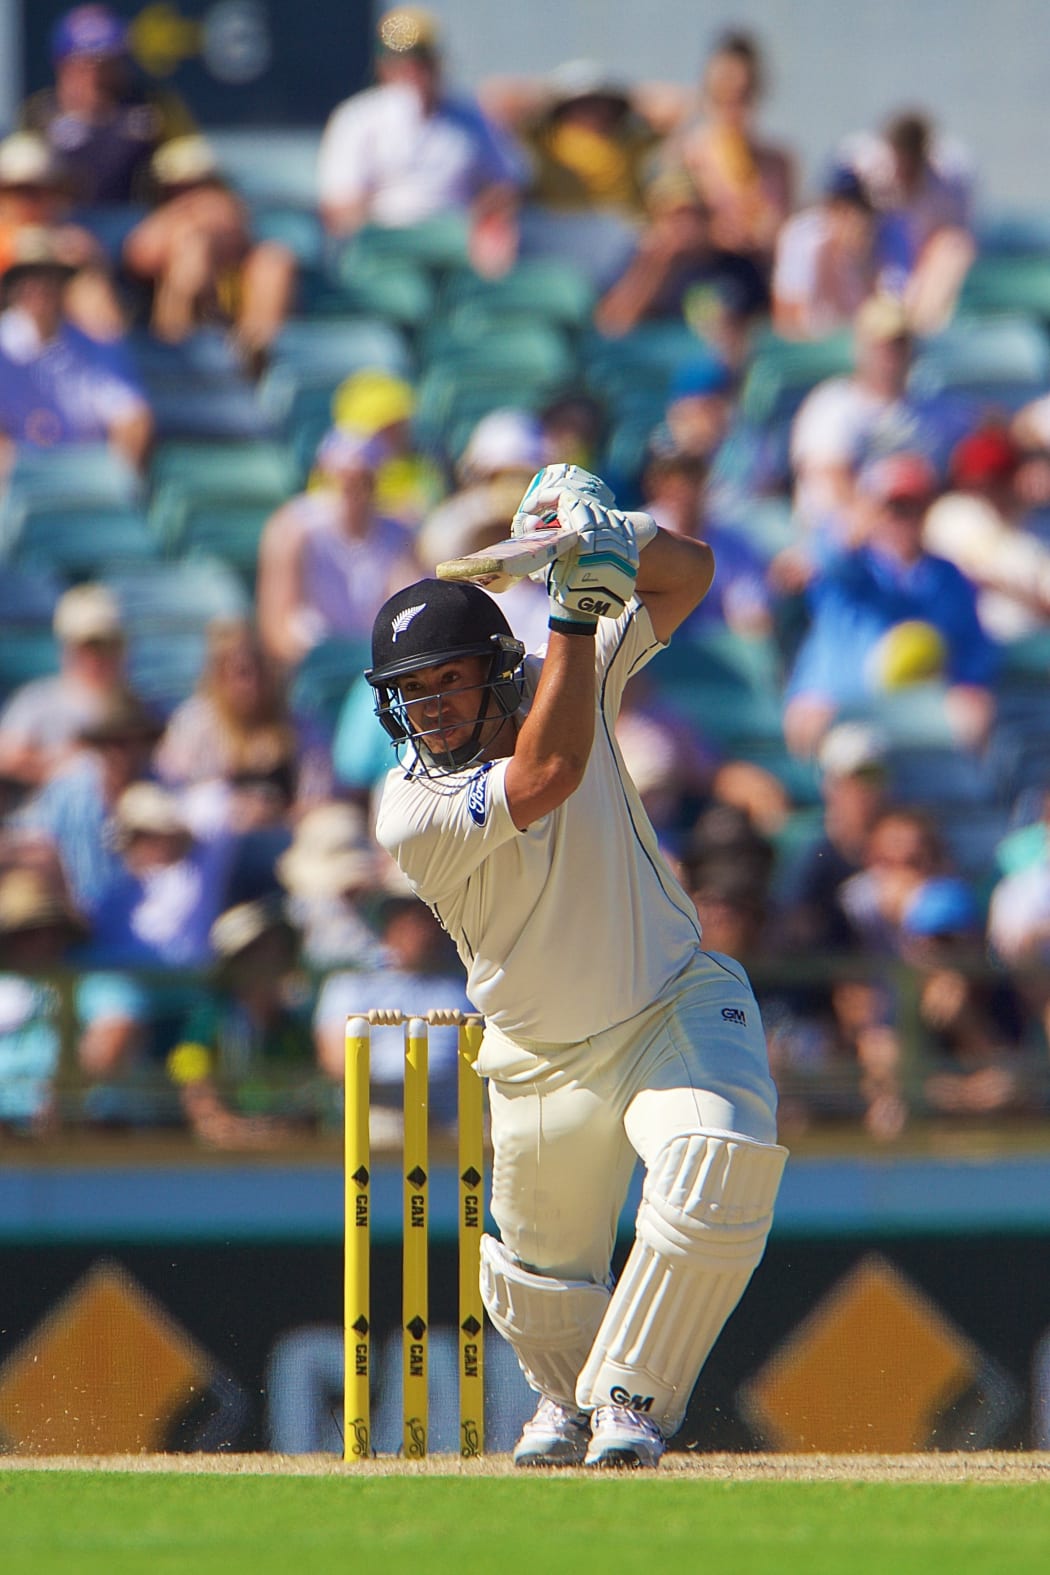 Ross Taylor of the New Zealand Black Caps drives during Day 3 on the 15th of November 2015. The New Zealand Black Caps tour of Australia, 2nd test at the WACA ground in Perth, 13 - 17th of November 2015.